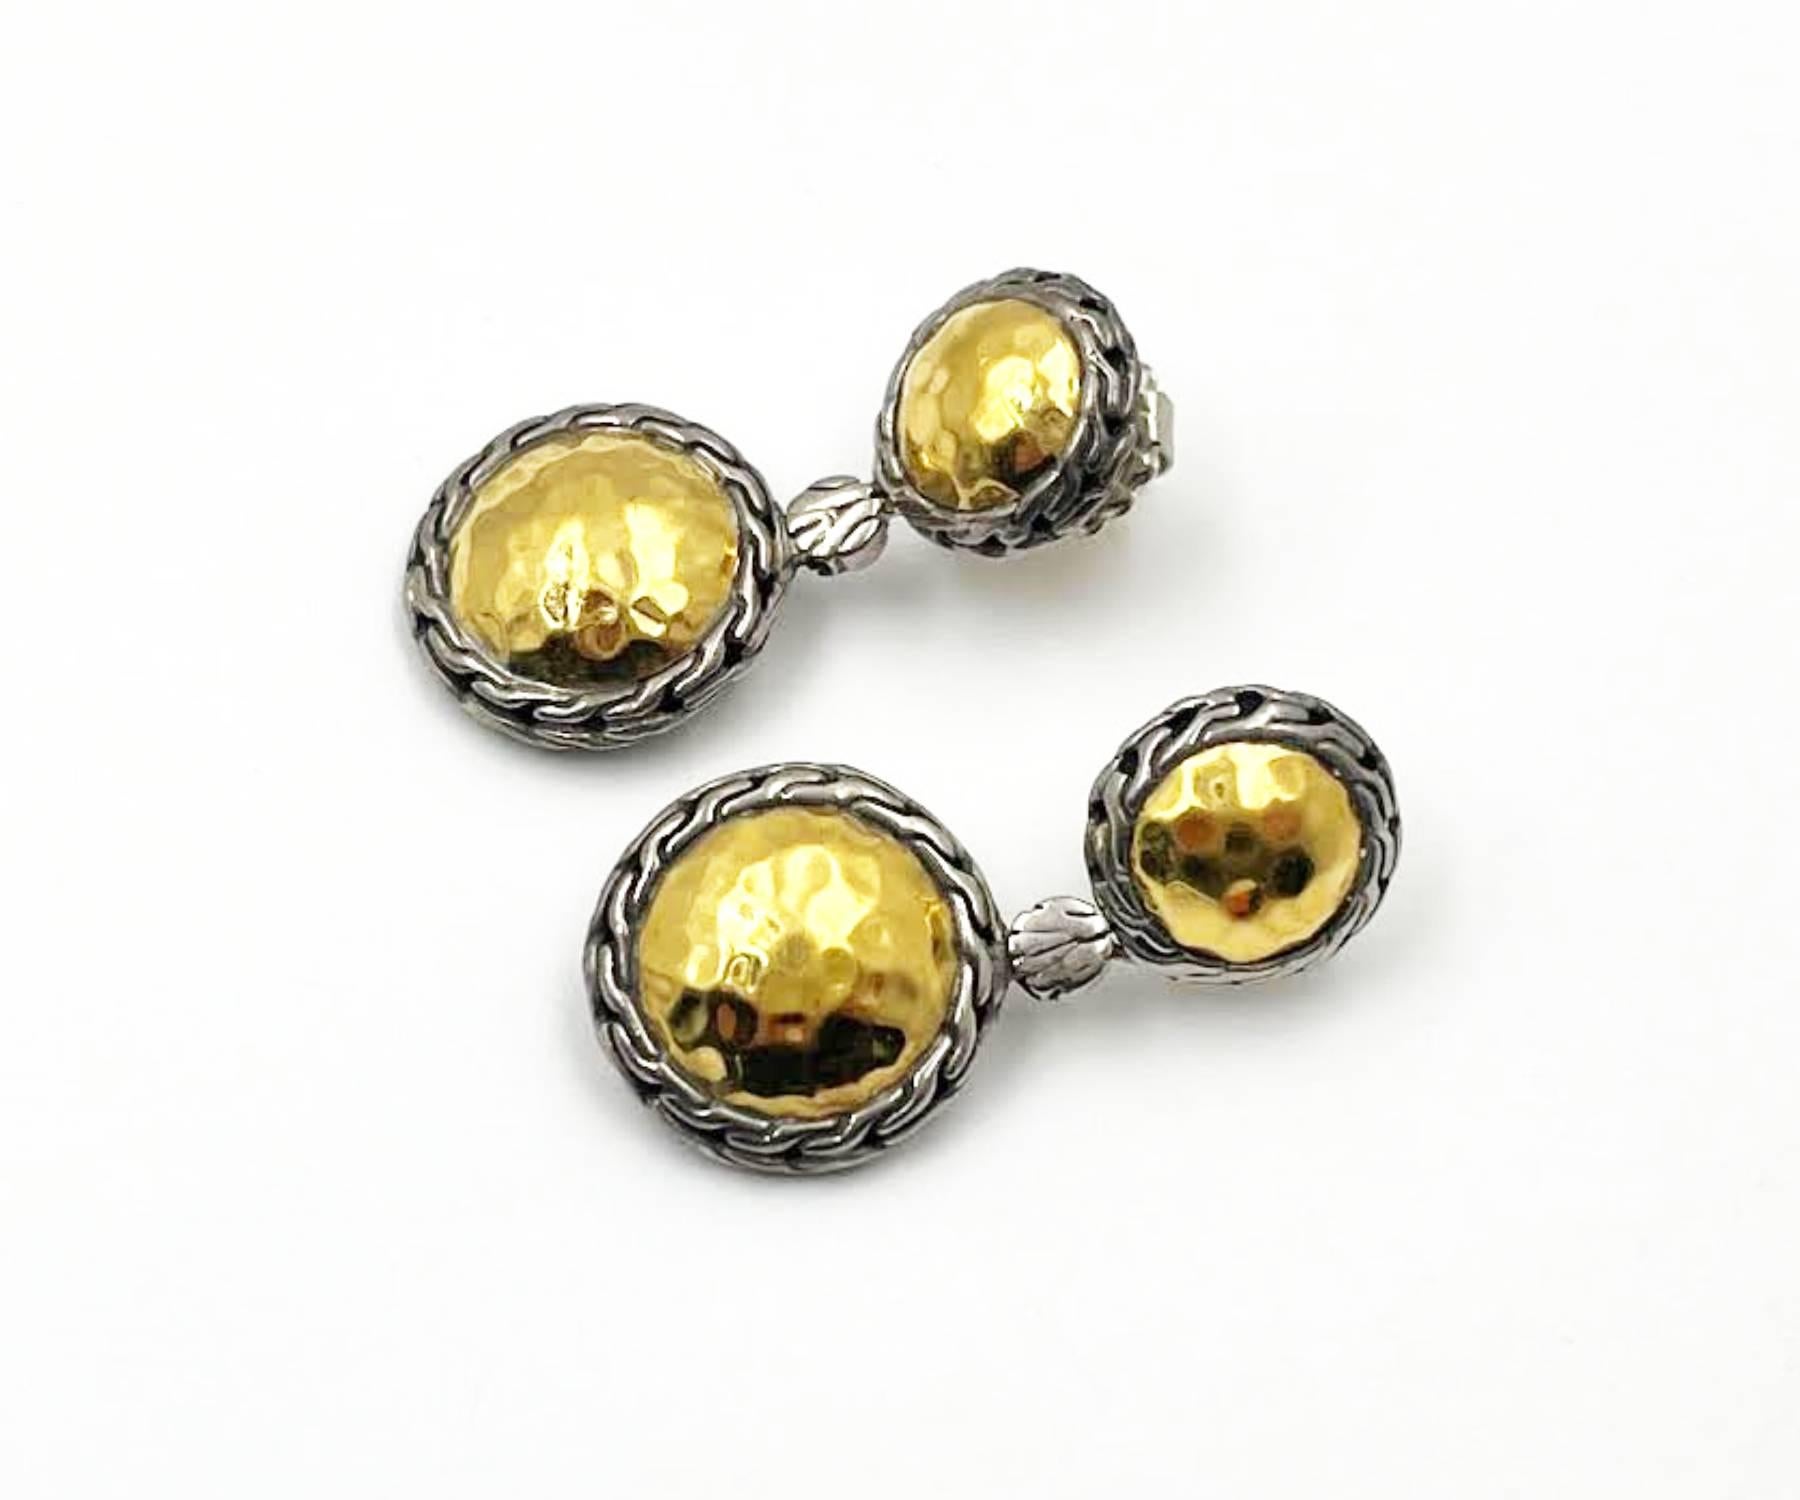 Round Yellow Gold 22K Silver 925 Hammered Dangle Piercing Earrings
*Marked 22K and 925
-Approximately 1.4